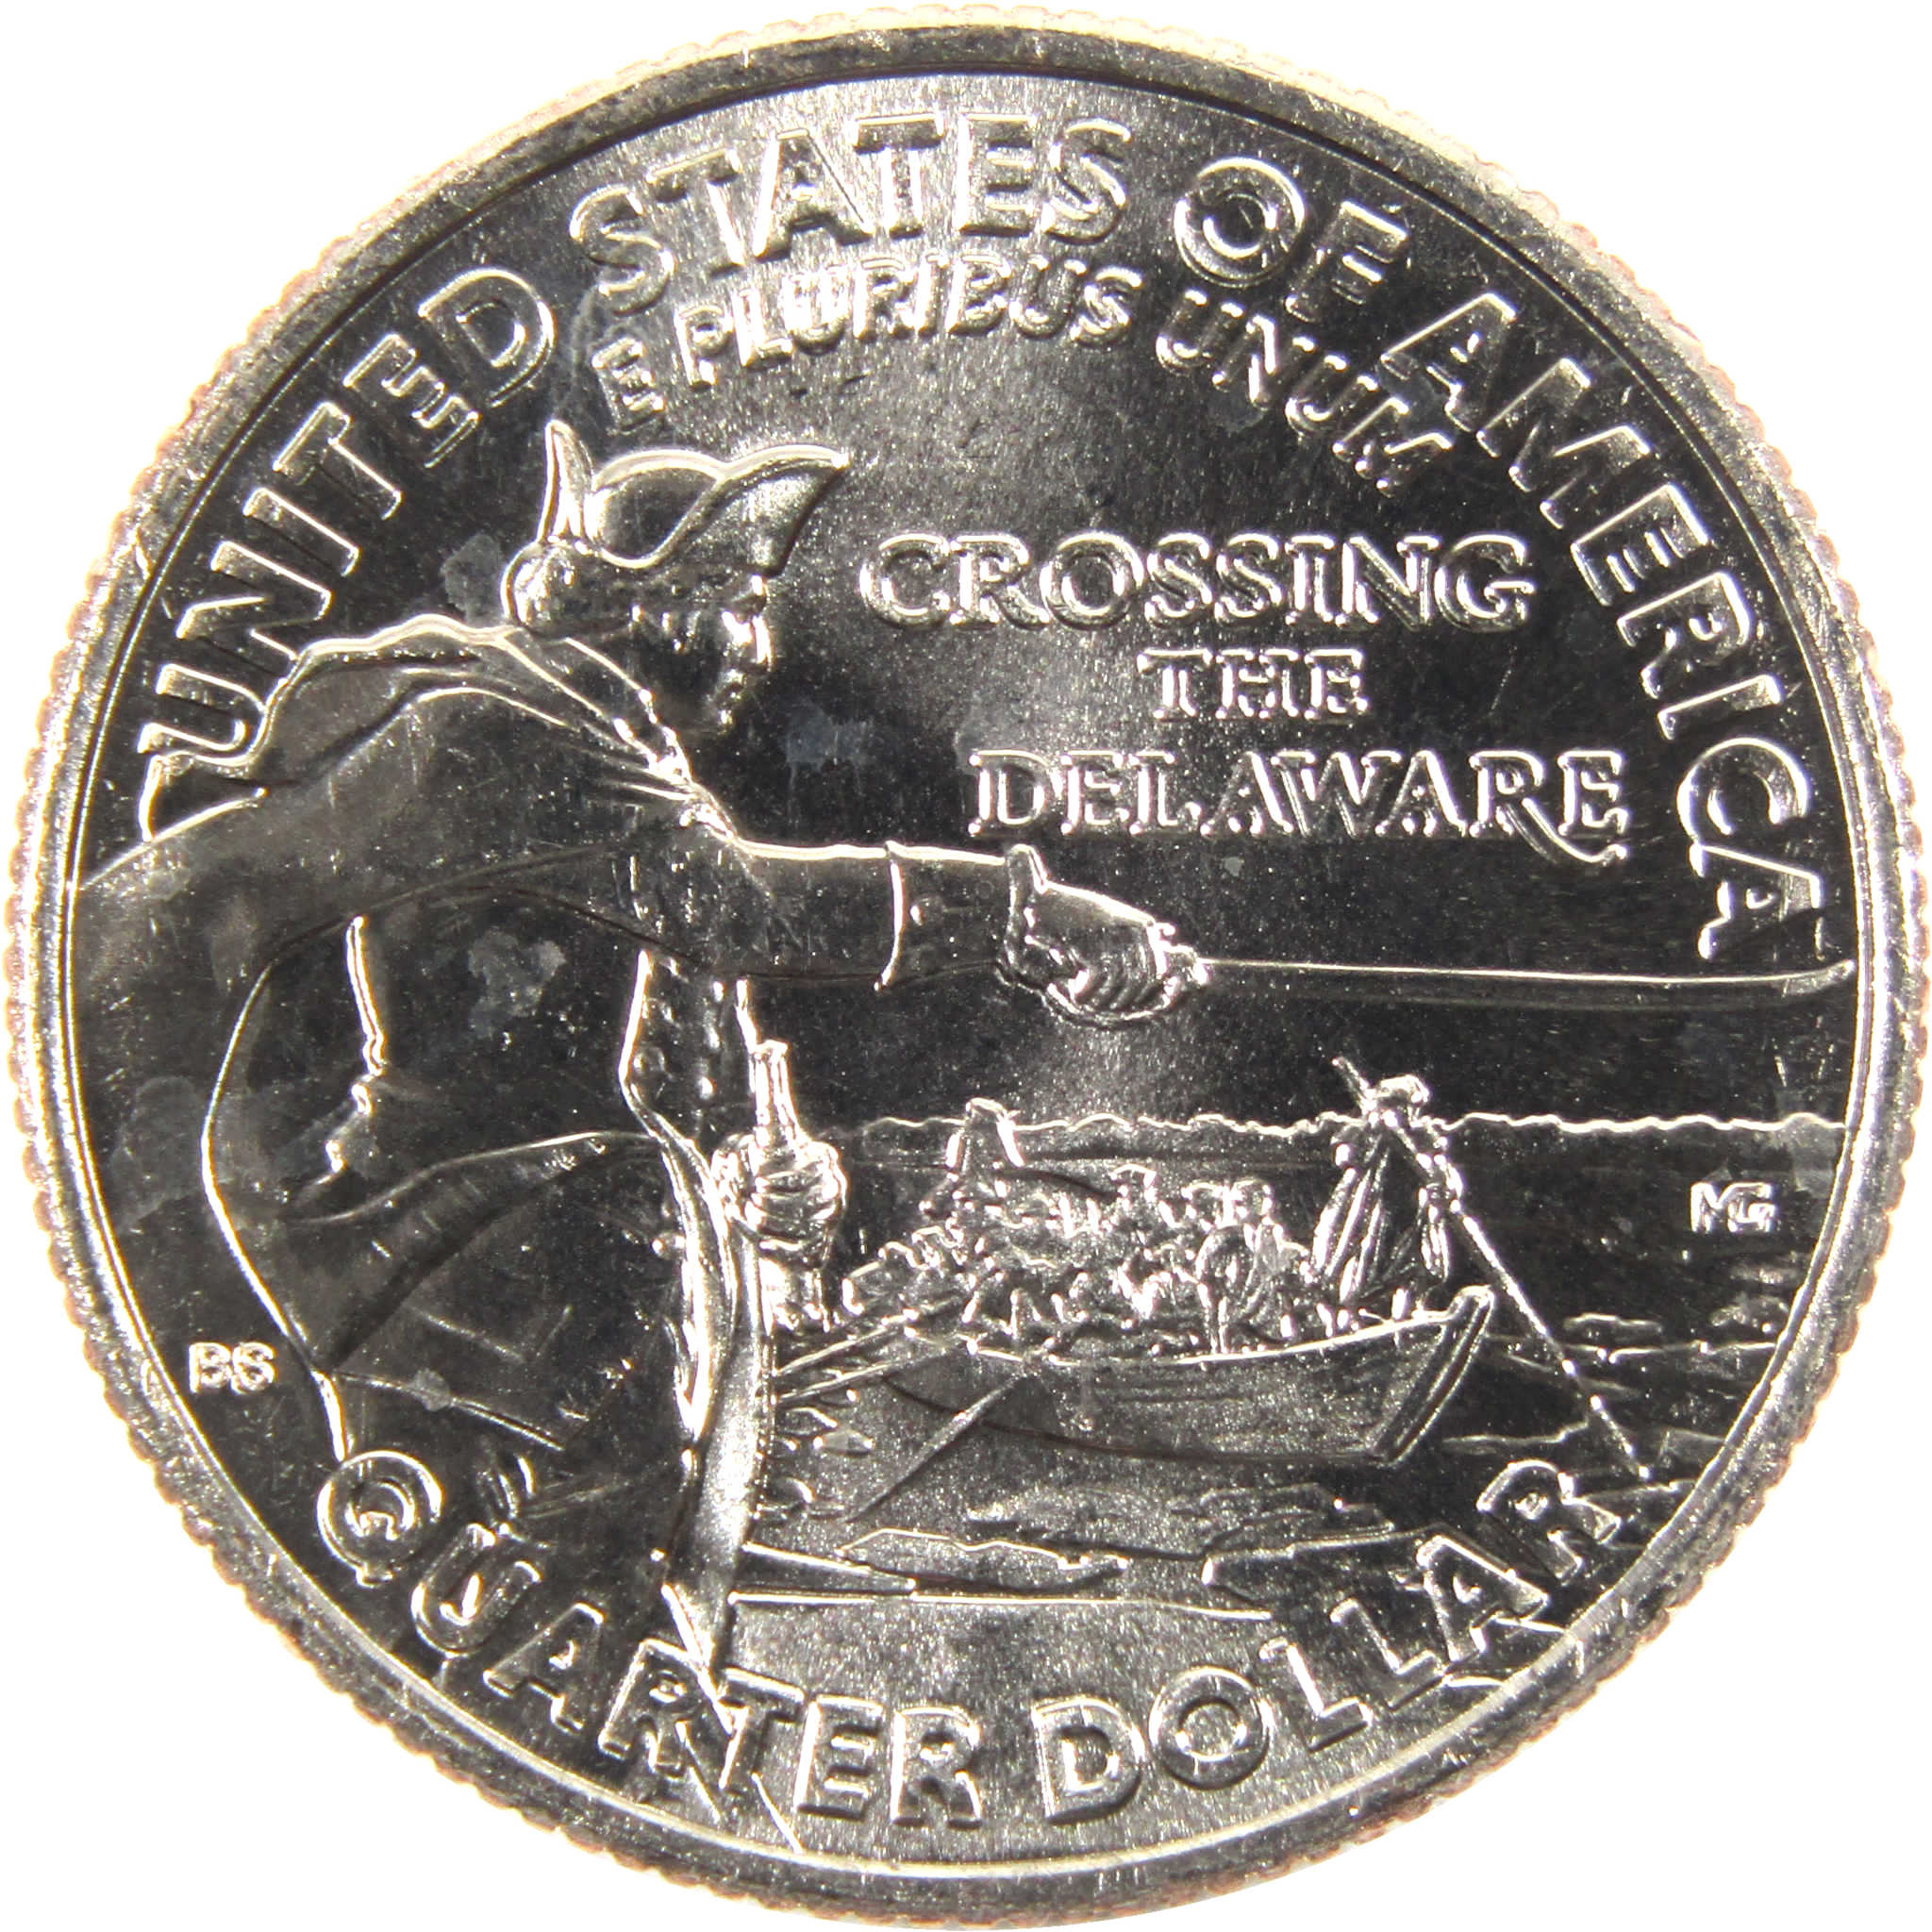 2021 D Washington Crossing the Delaware Quarter Uncirculated Clad Coin